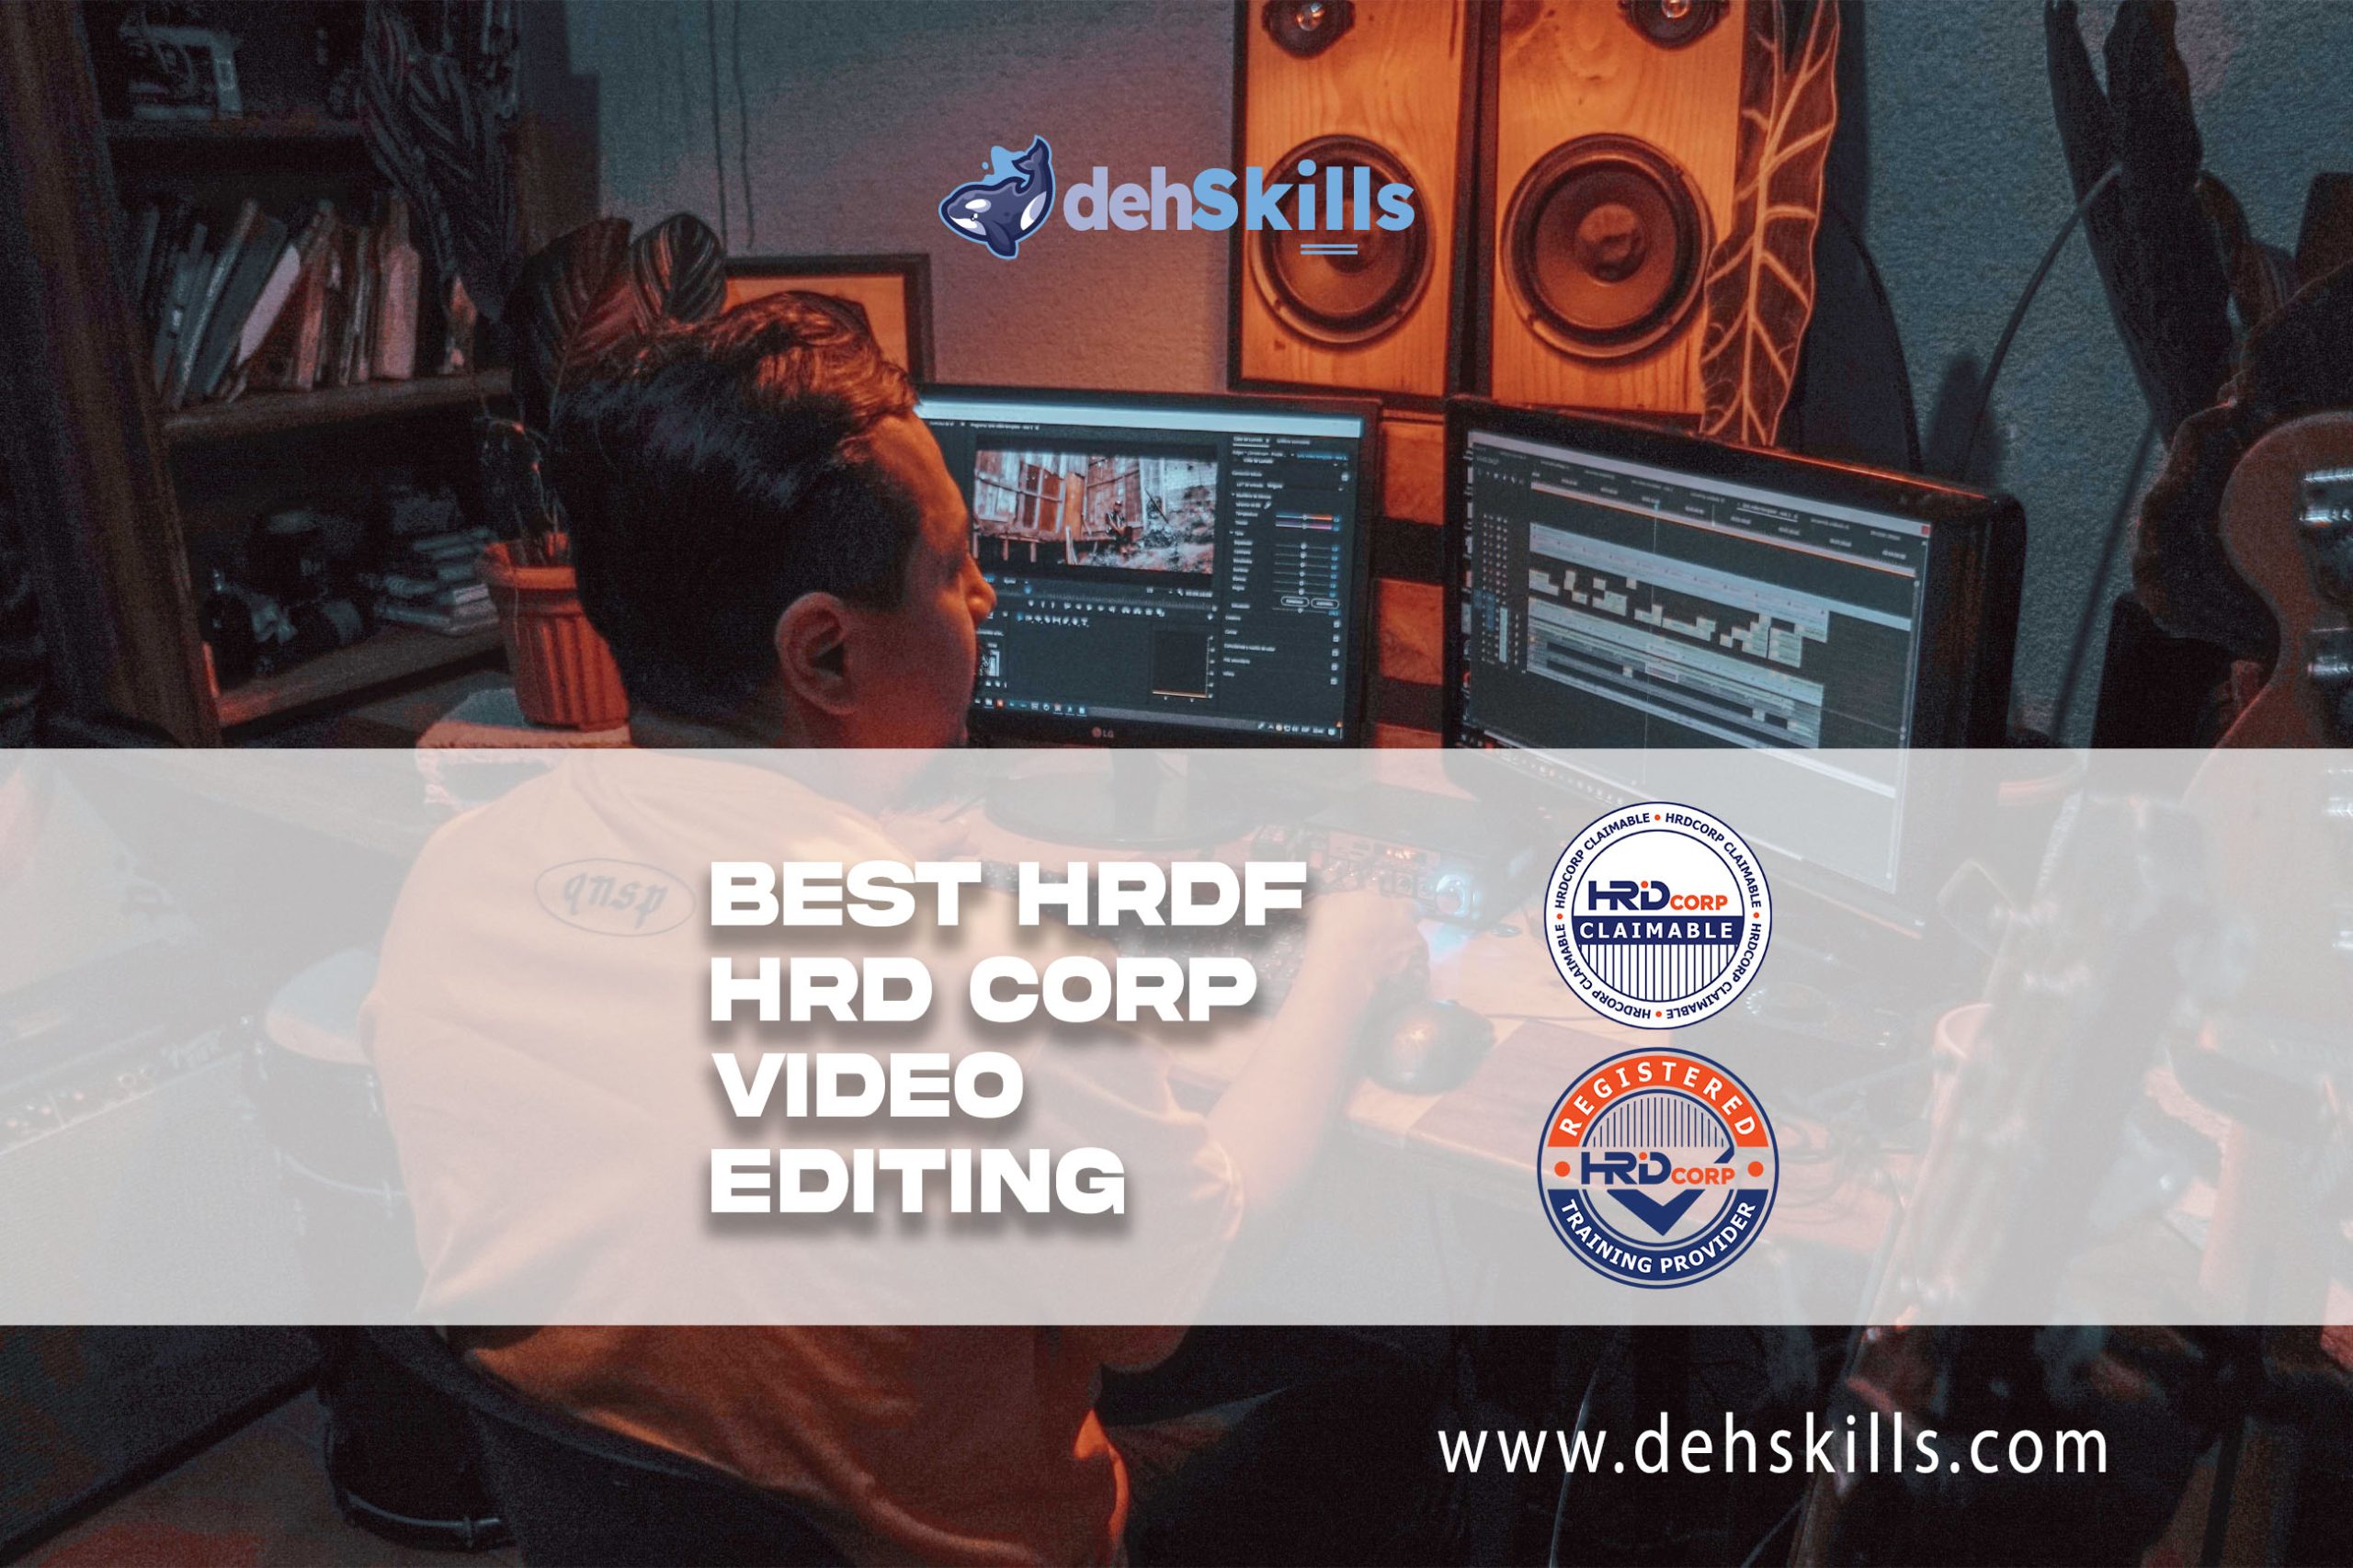 HRDF HRD Corp Claimable Video Editing Training